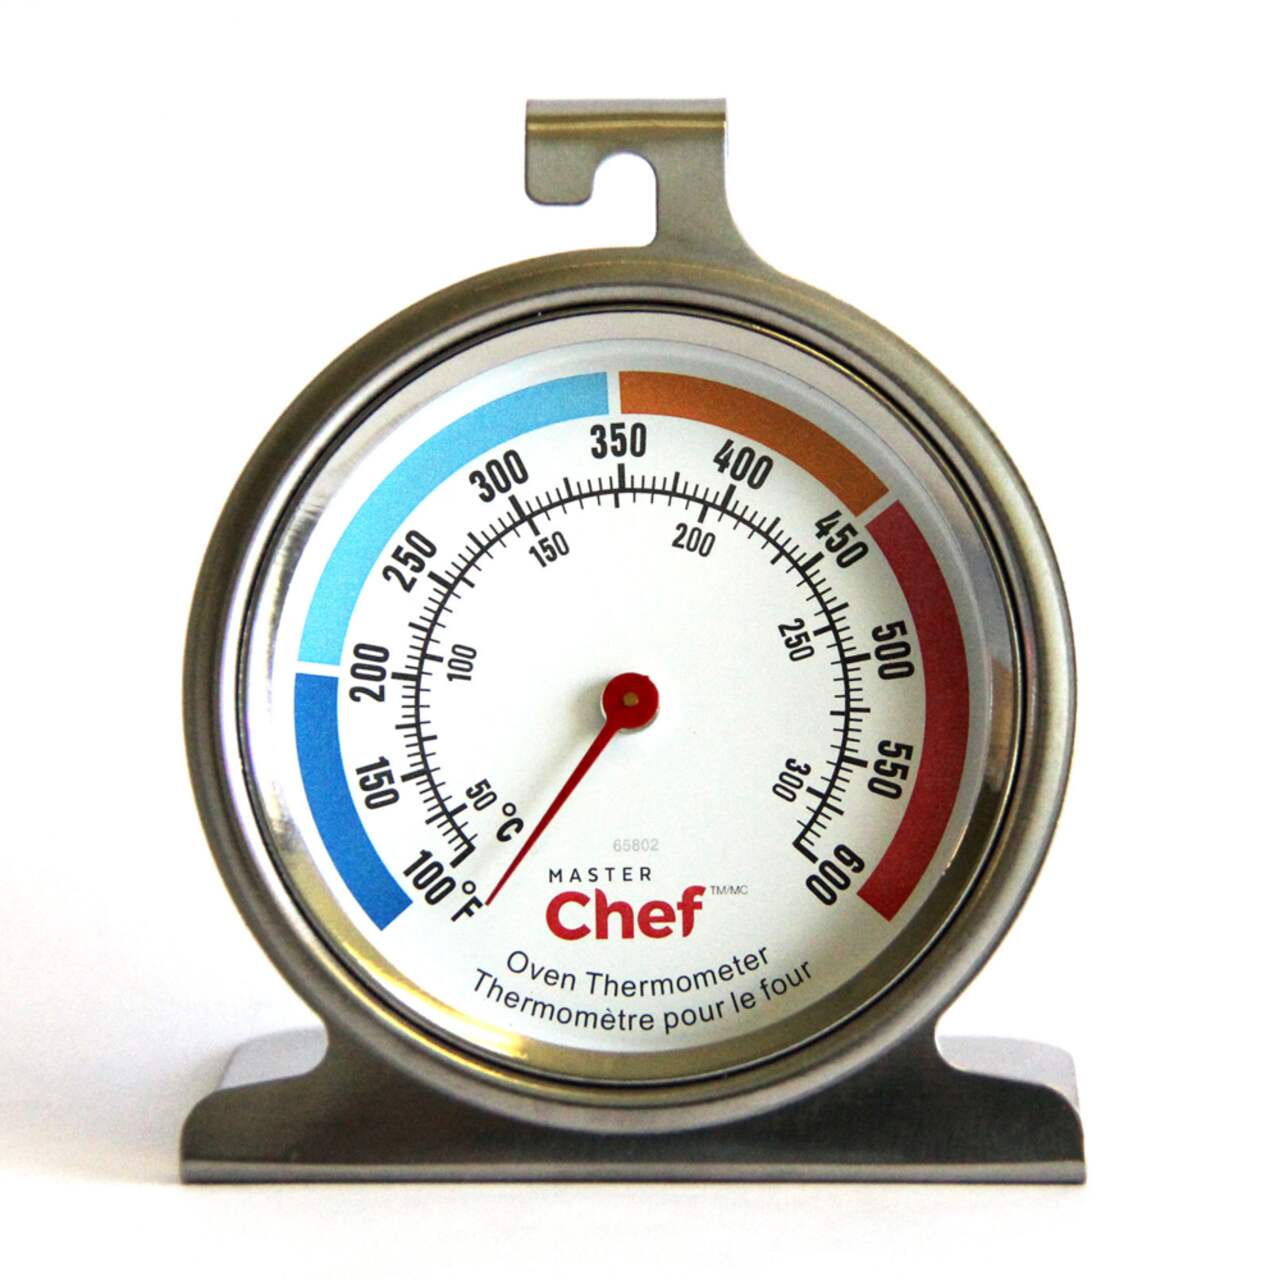 MASTER Chef Oven Thermometer